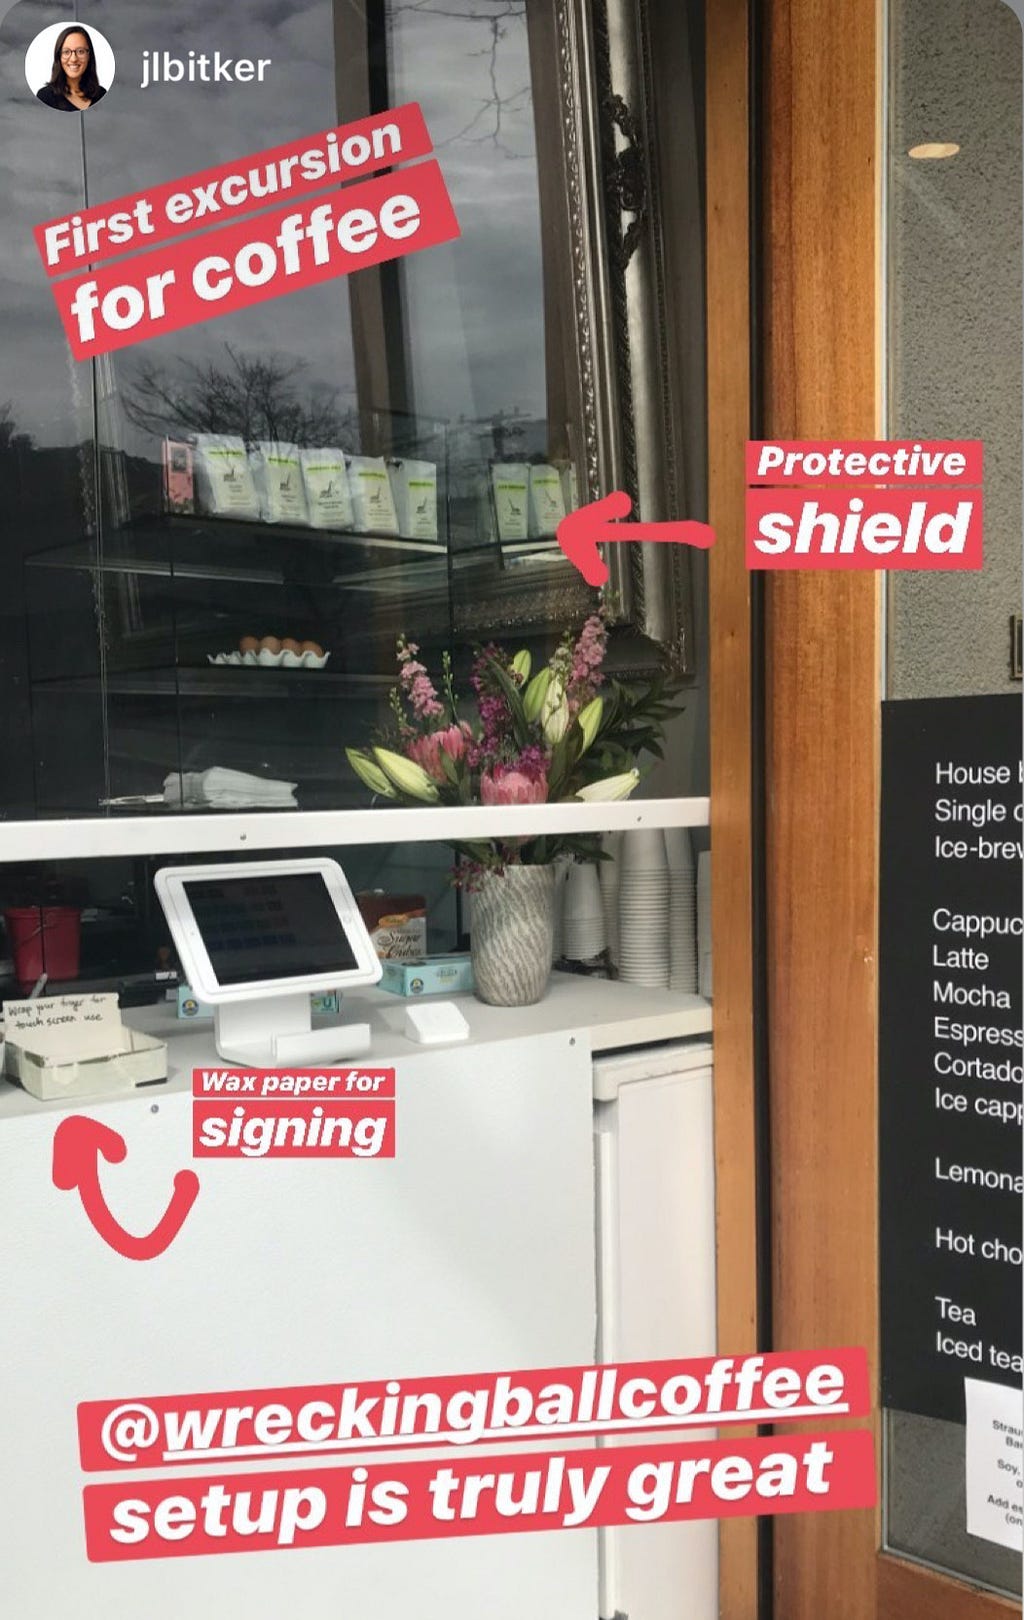 Instagram post that indicates “protective shield” and “wax paper for signing” and “wrecking ball coffee setup is truly great